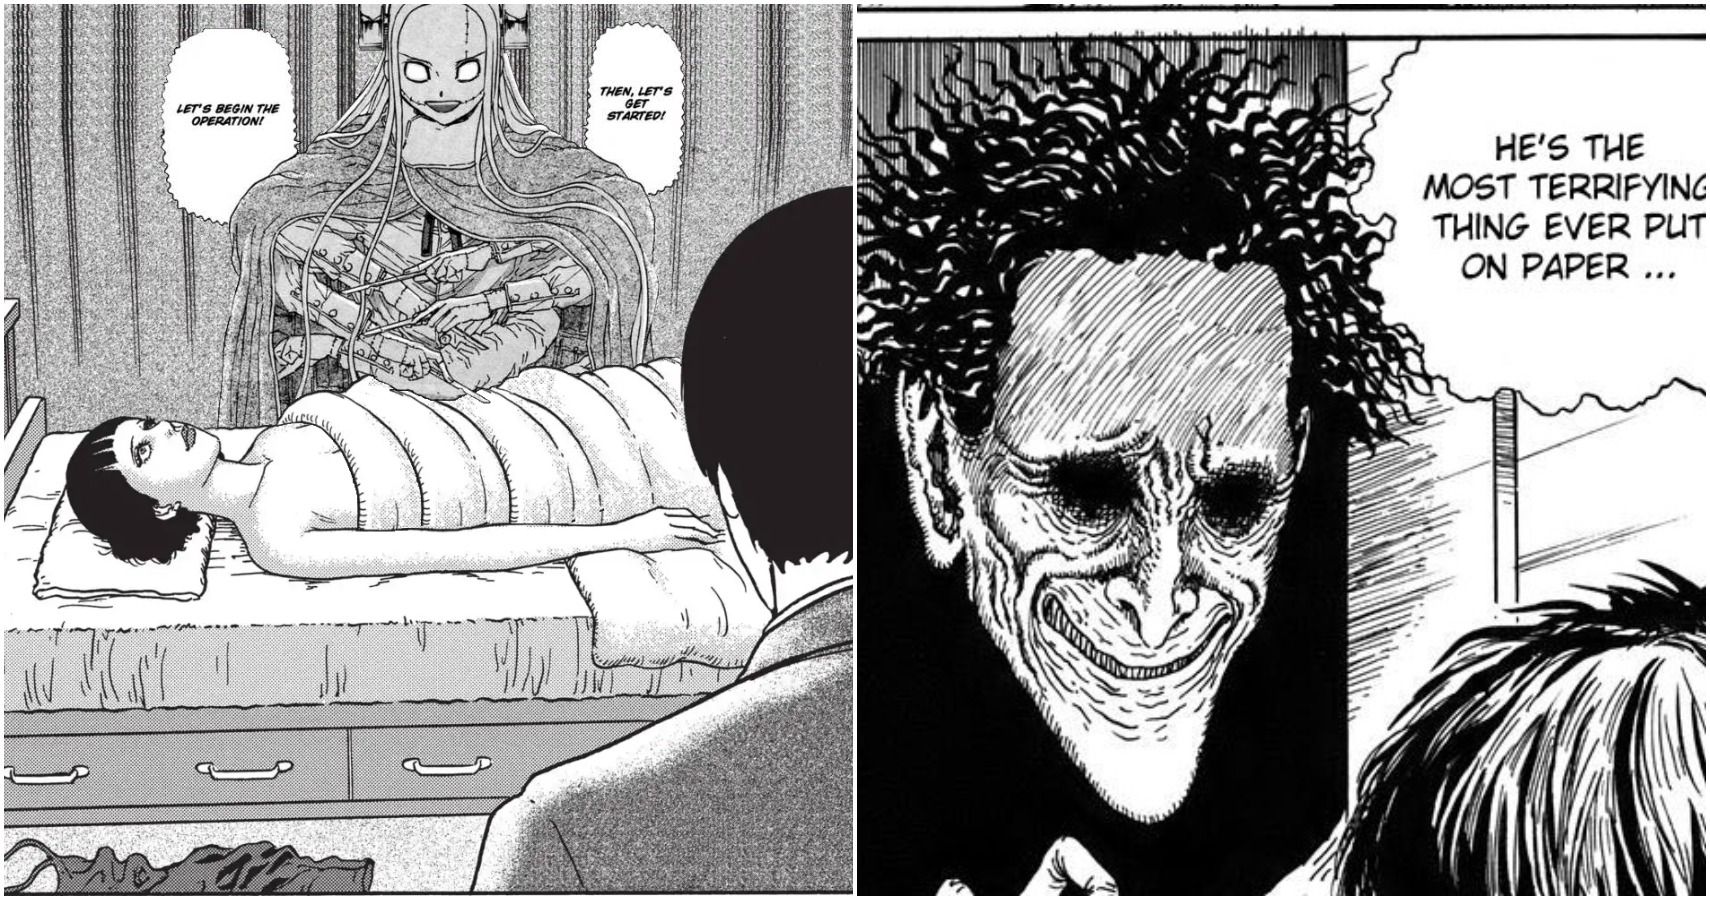 New Details on Junji Ito Anime - Too Far Gone